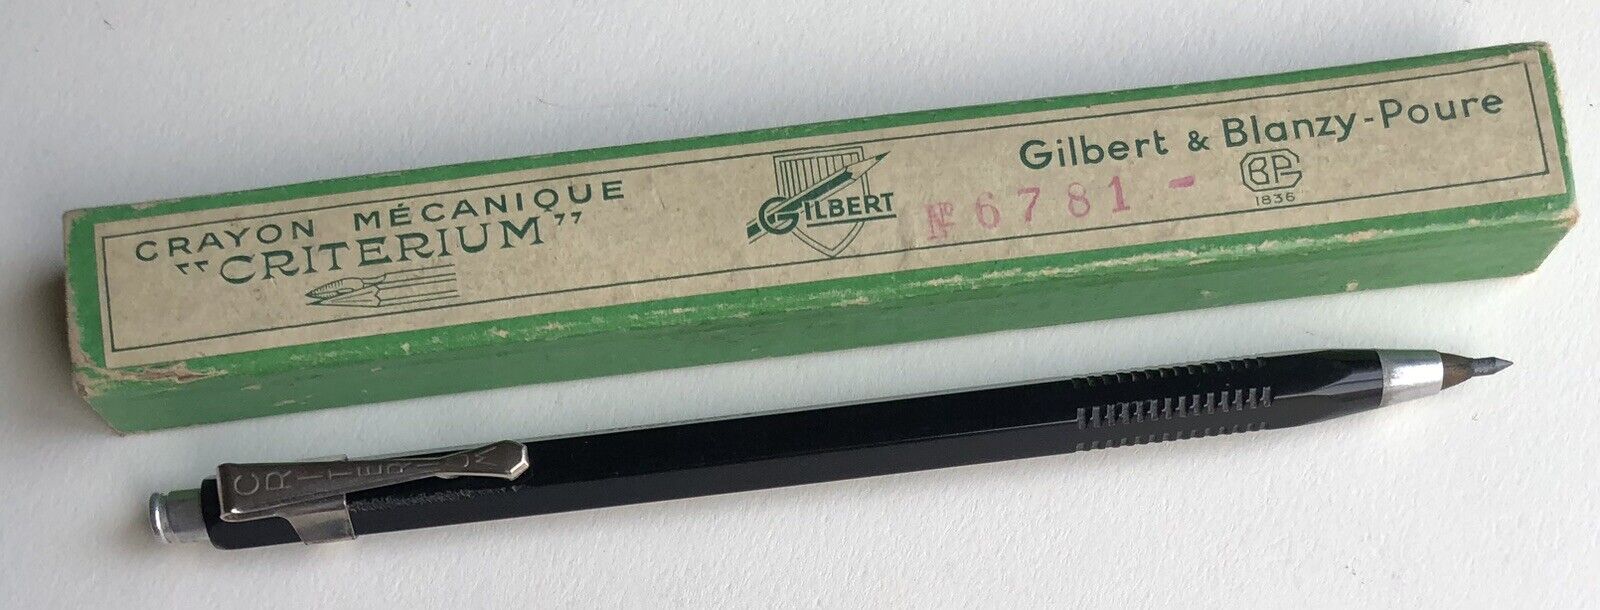 Vintage GILBERT & BLANZY-POURE Criterium 2mm Mechanical Drafting Pencil Clutch